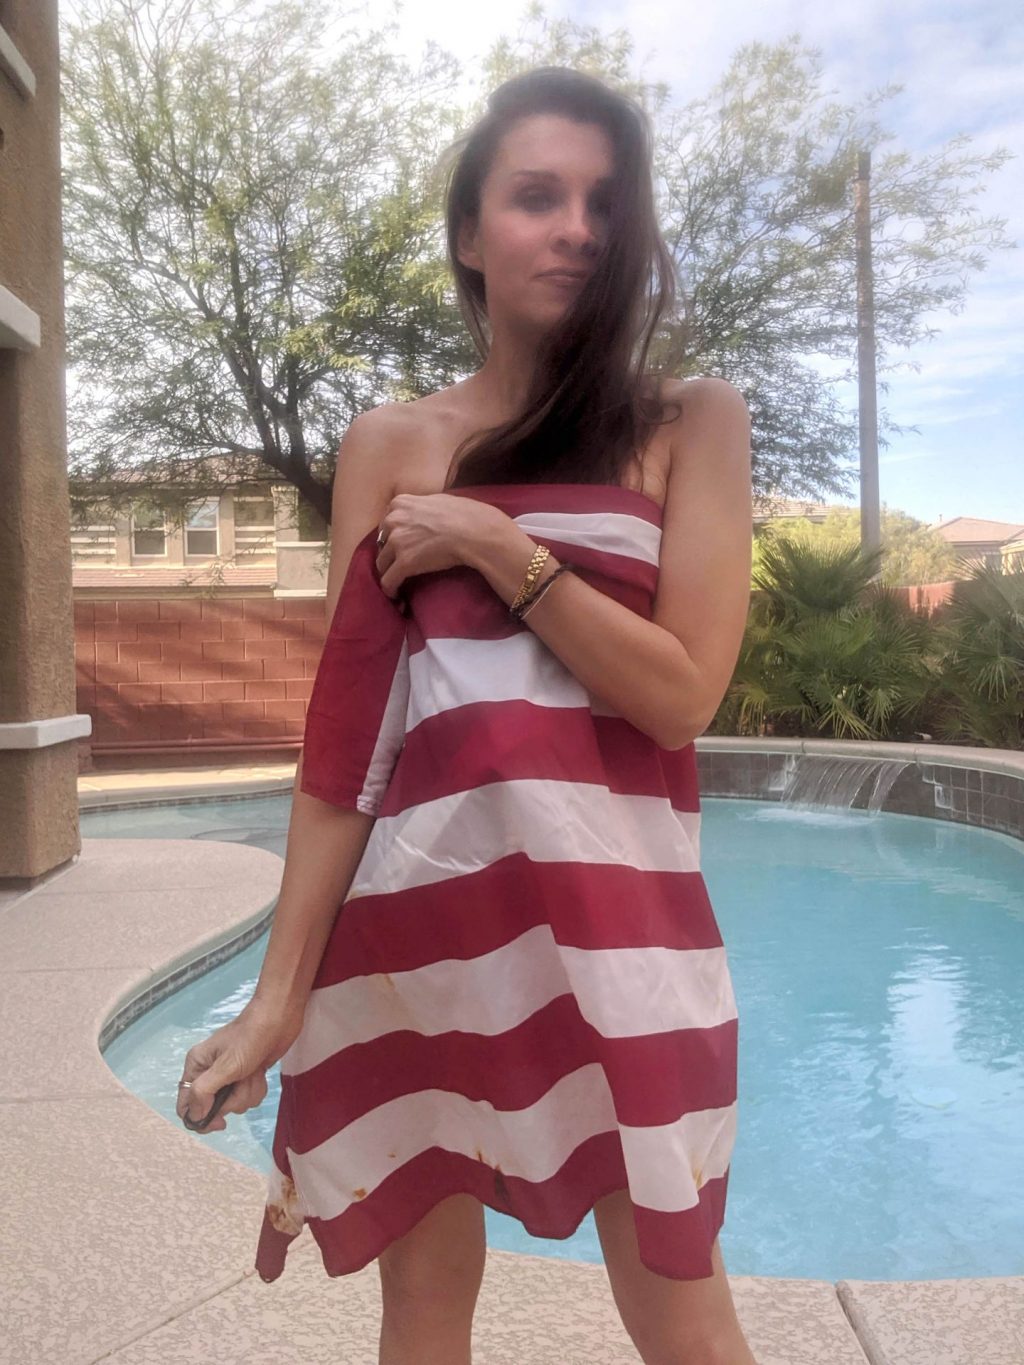 Alicia Arden Spends a Patriotic July 4th Weekend Fully Naked (31 Photos)